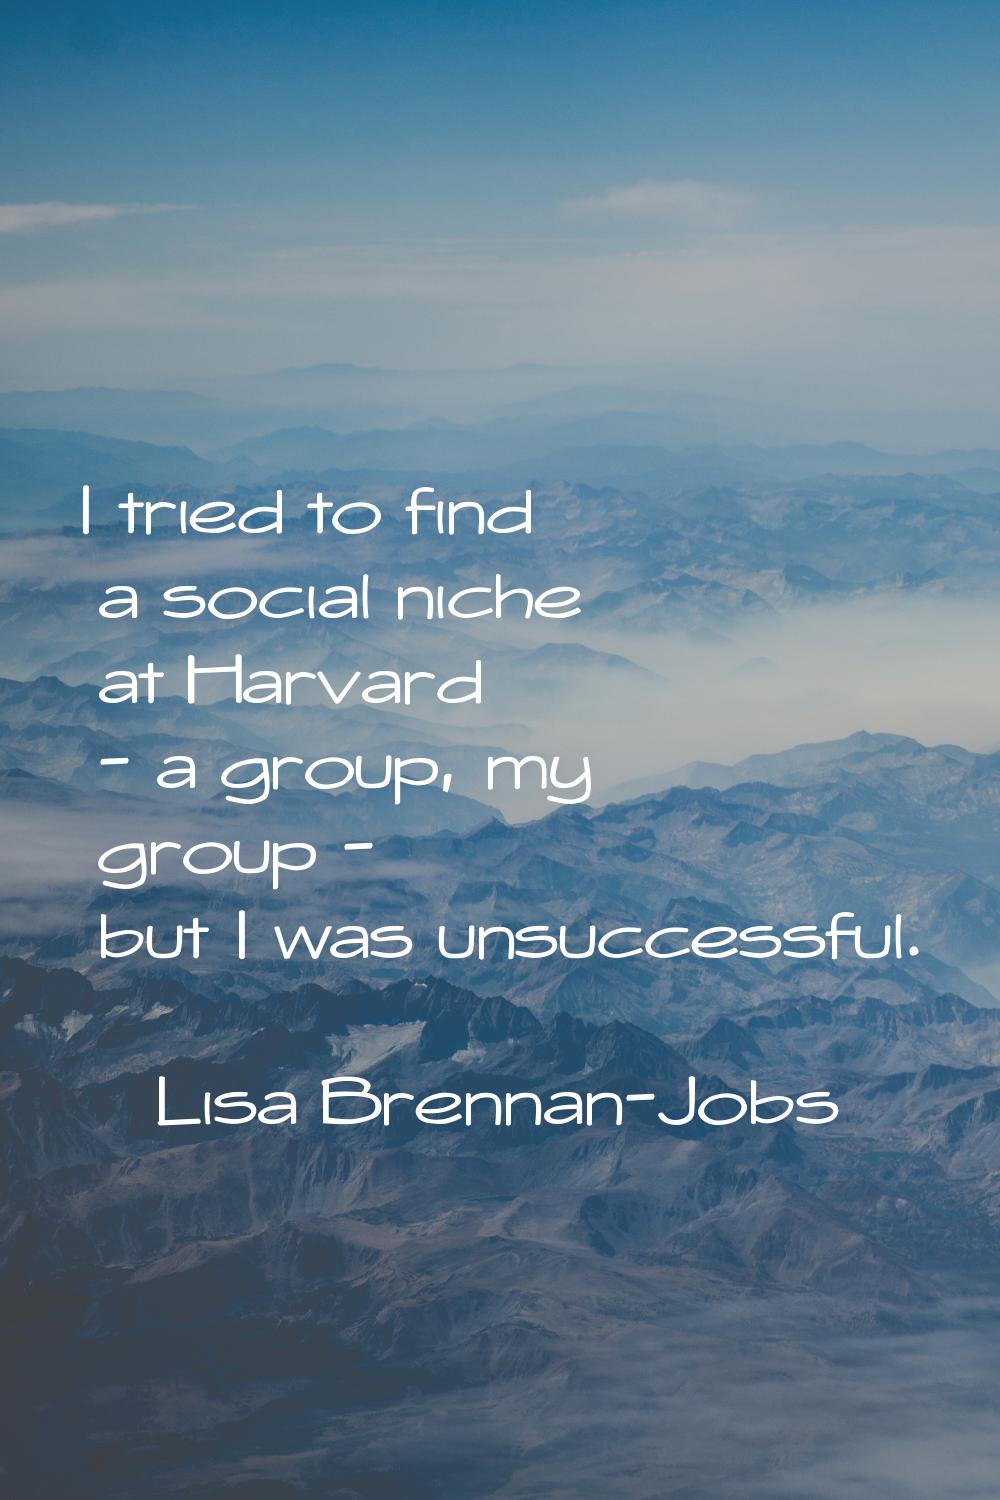 I tried to find a social niche at Harvard - a group, my group - but I was unsuccessful.